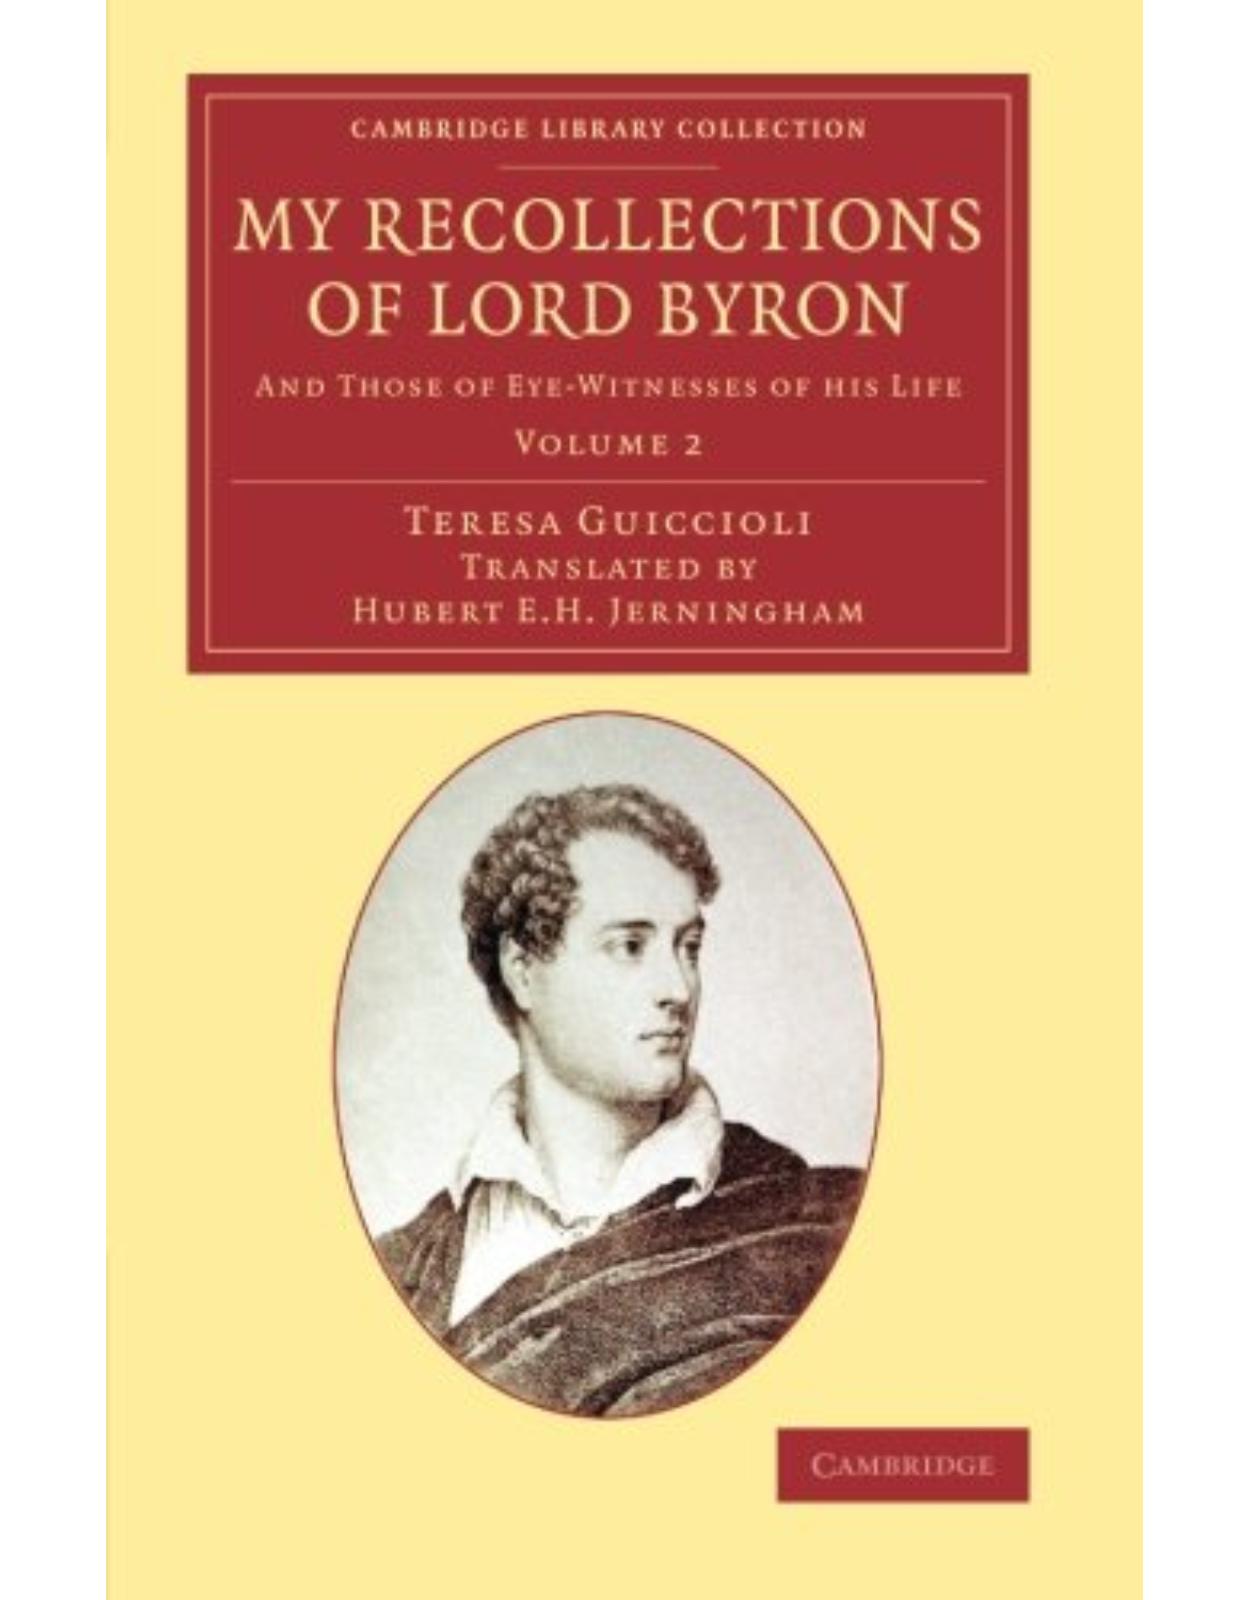 My Recollections of Lord Byron 2 Volume Set: My Recollections of Lord Byron: And Those of Eye-Witnesses of his Life: Volume 2 (Cambridge Library Collection - Literary Studies) 